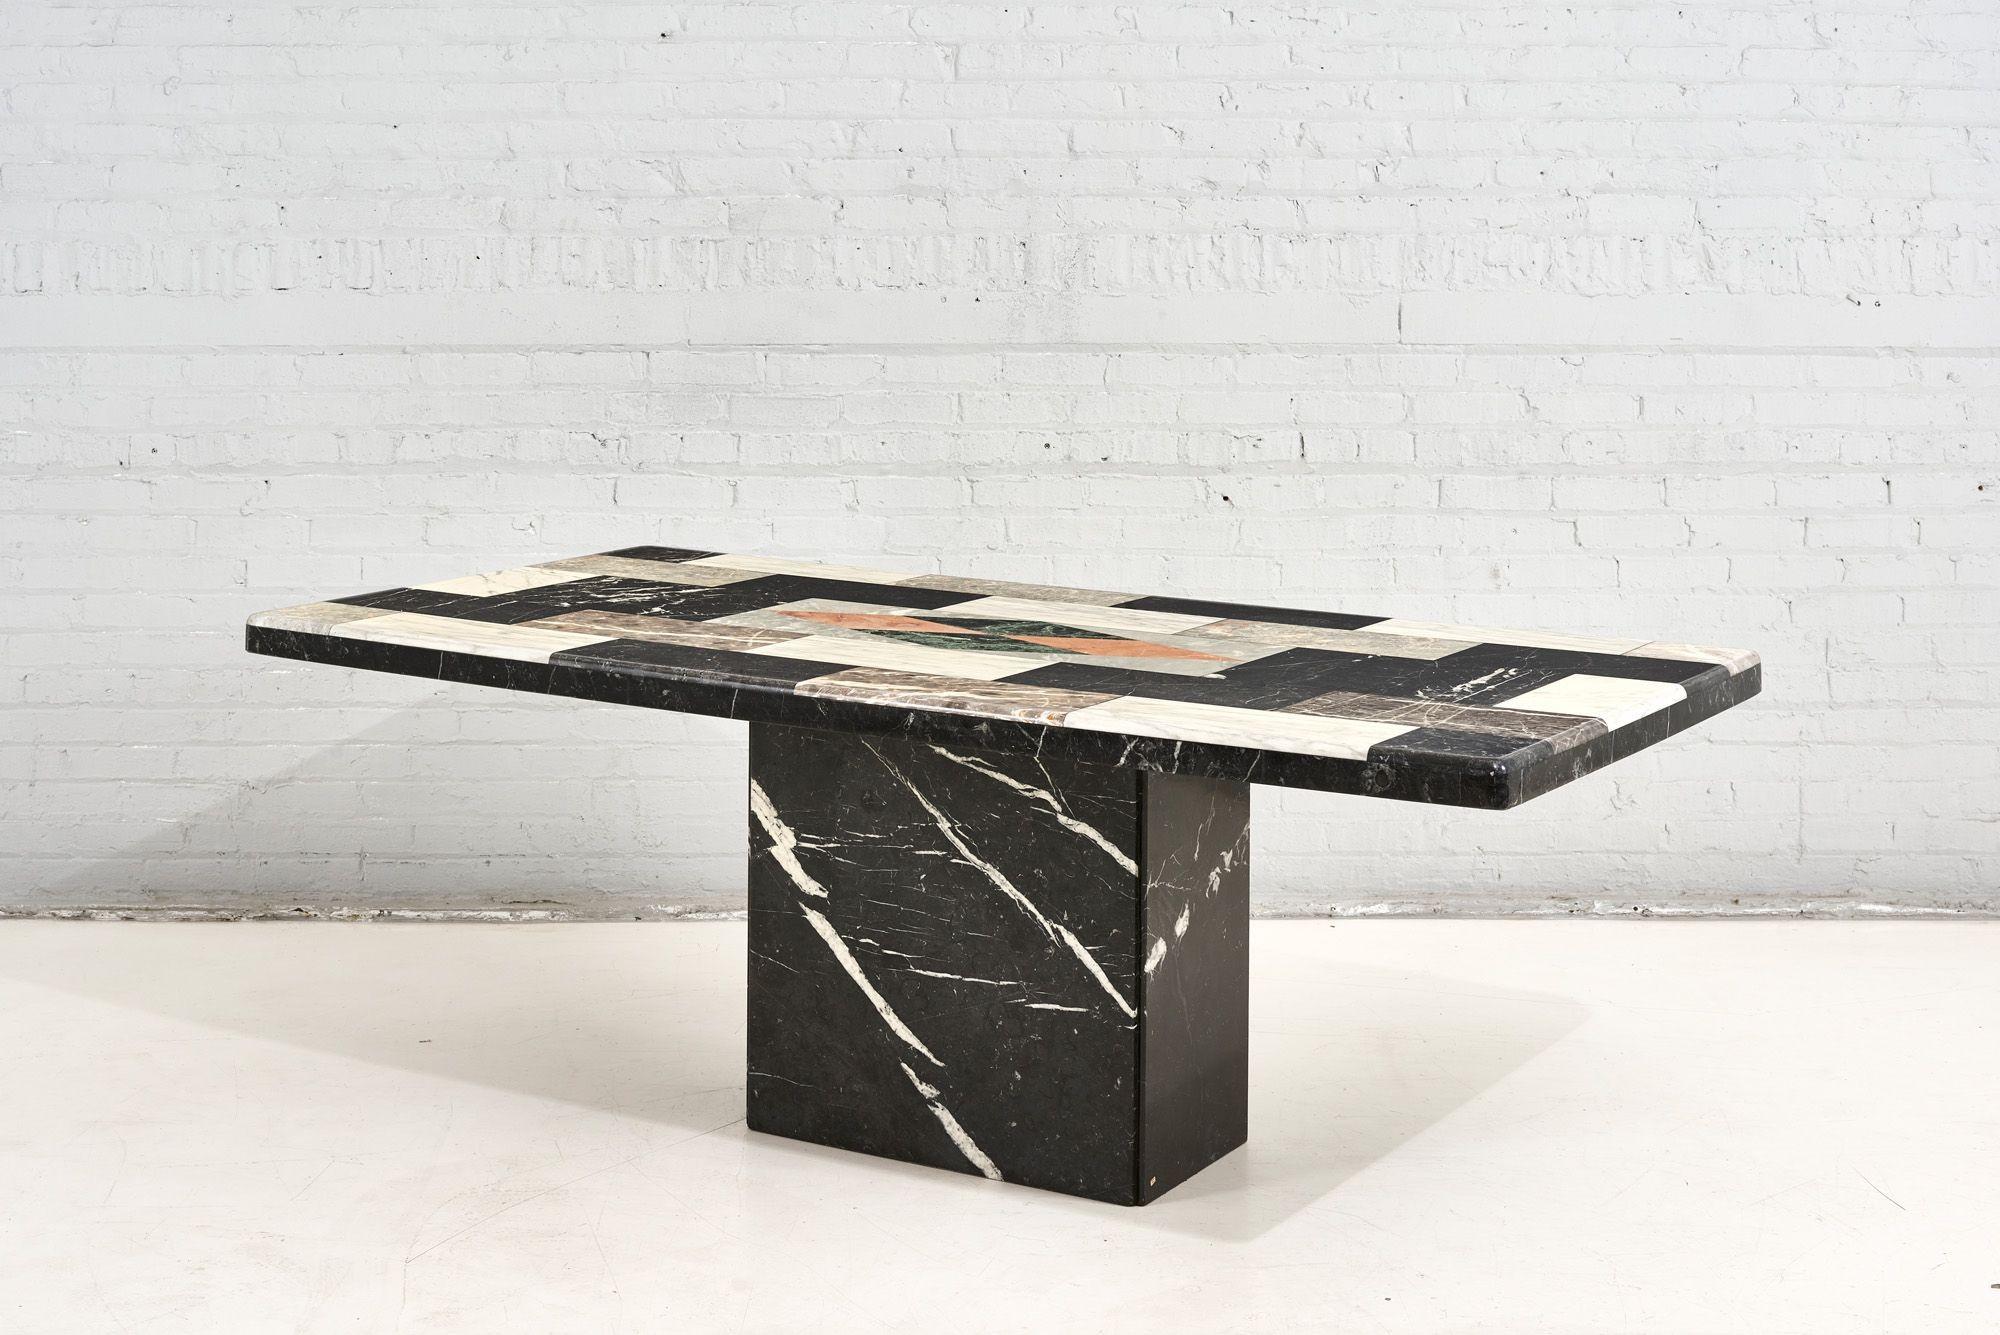 Pietre Dure dining table w/ black marble base, 1960. Table top is made of multiple colors of marble. Done in Pietre Dure technique using inlayed marble to create this piece of art.